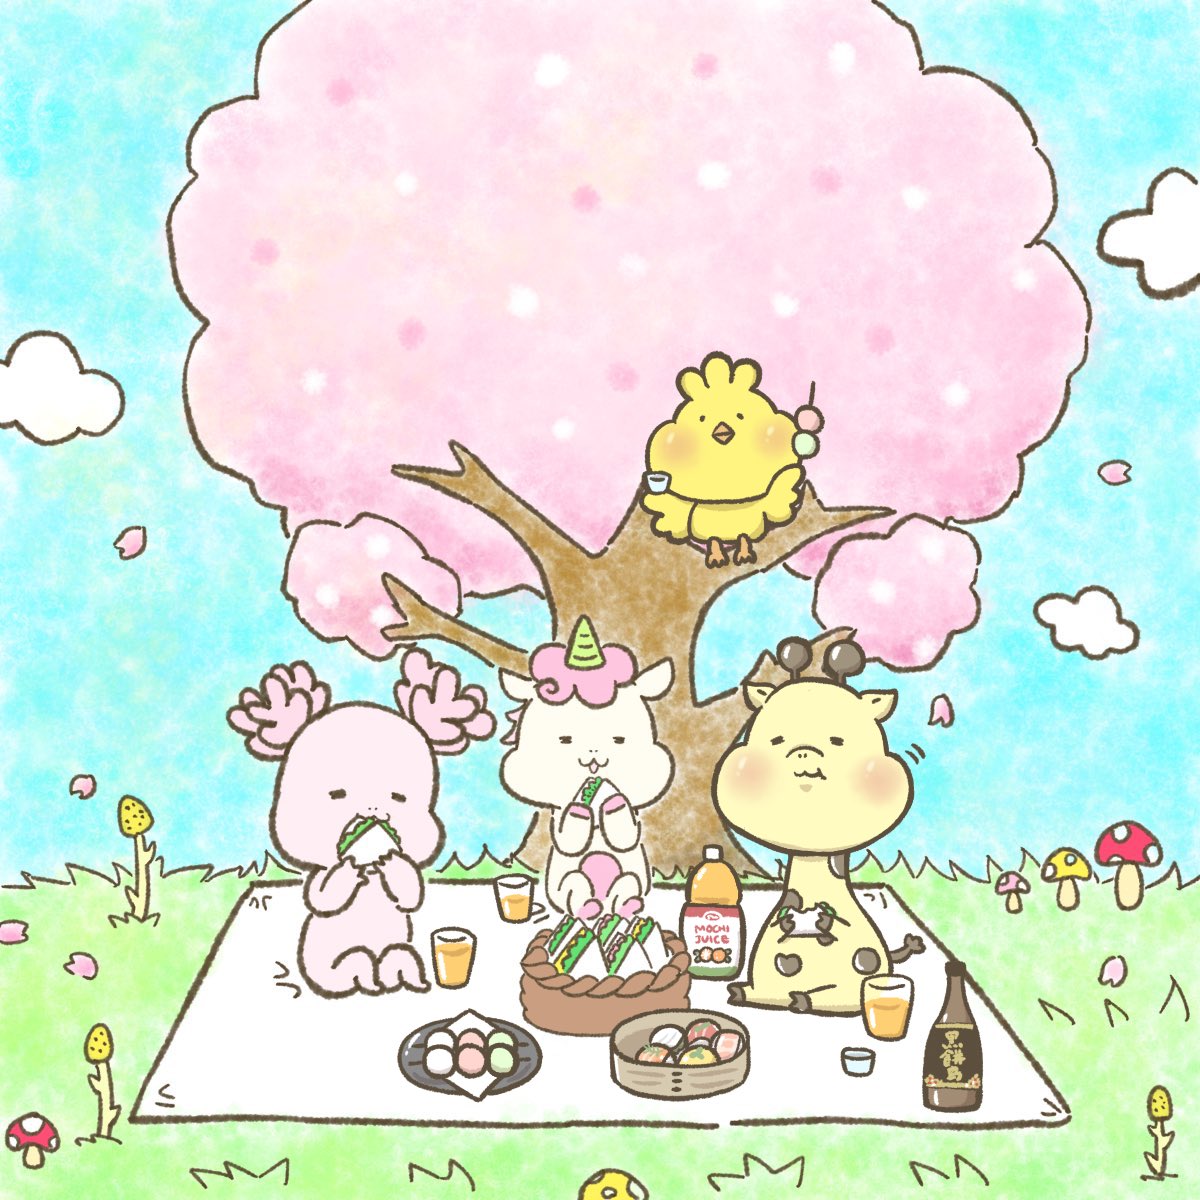 Cherry blossom viewing party with Mochi×Pome Animals